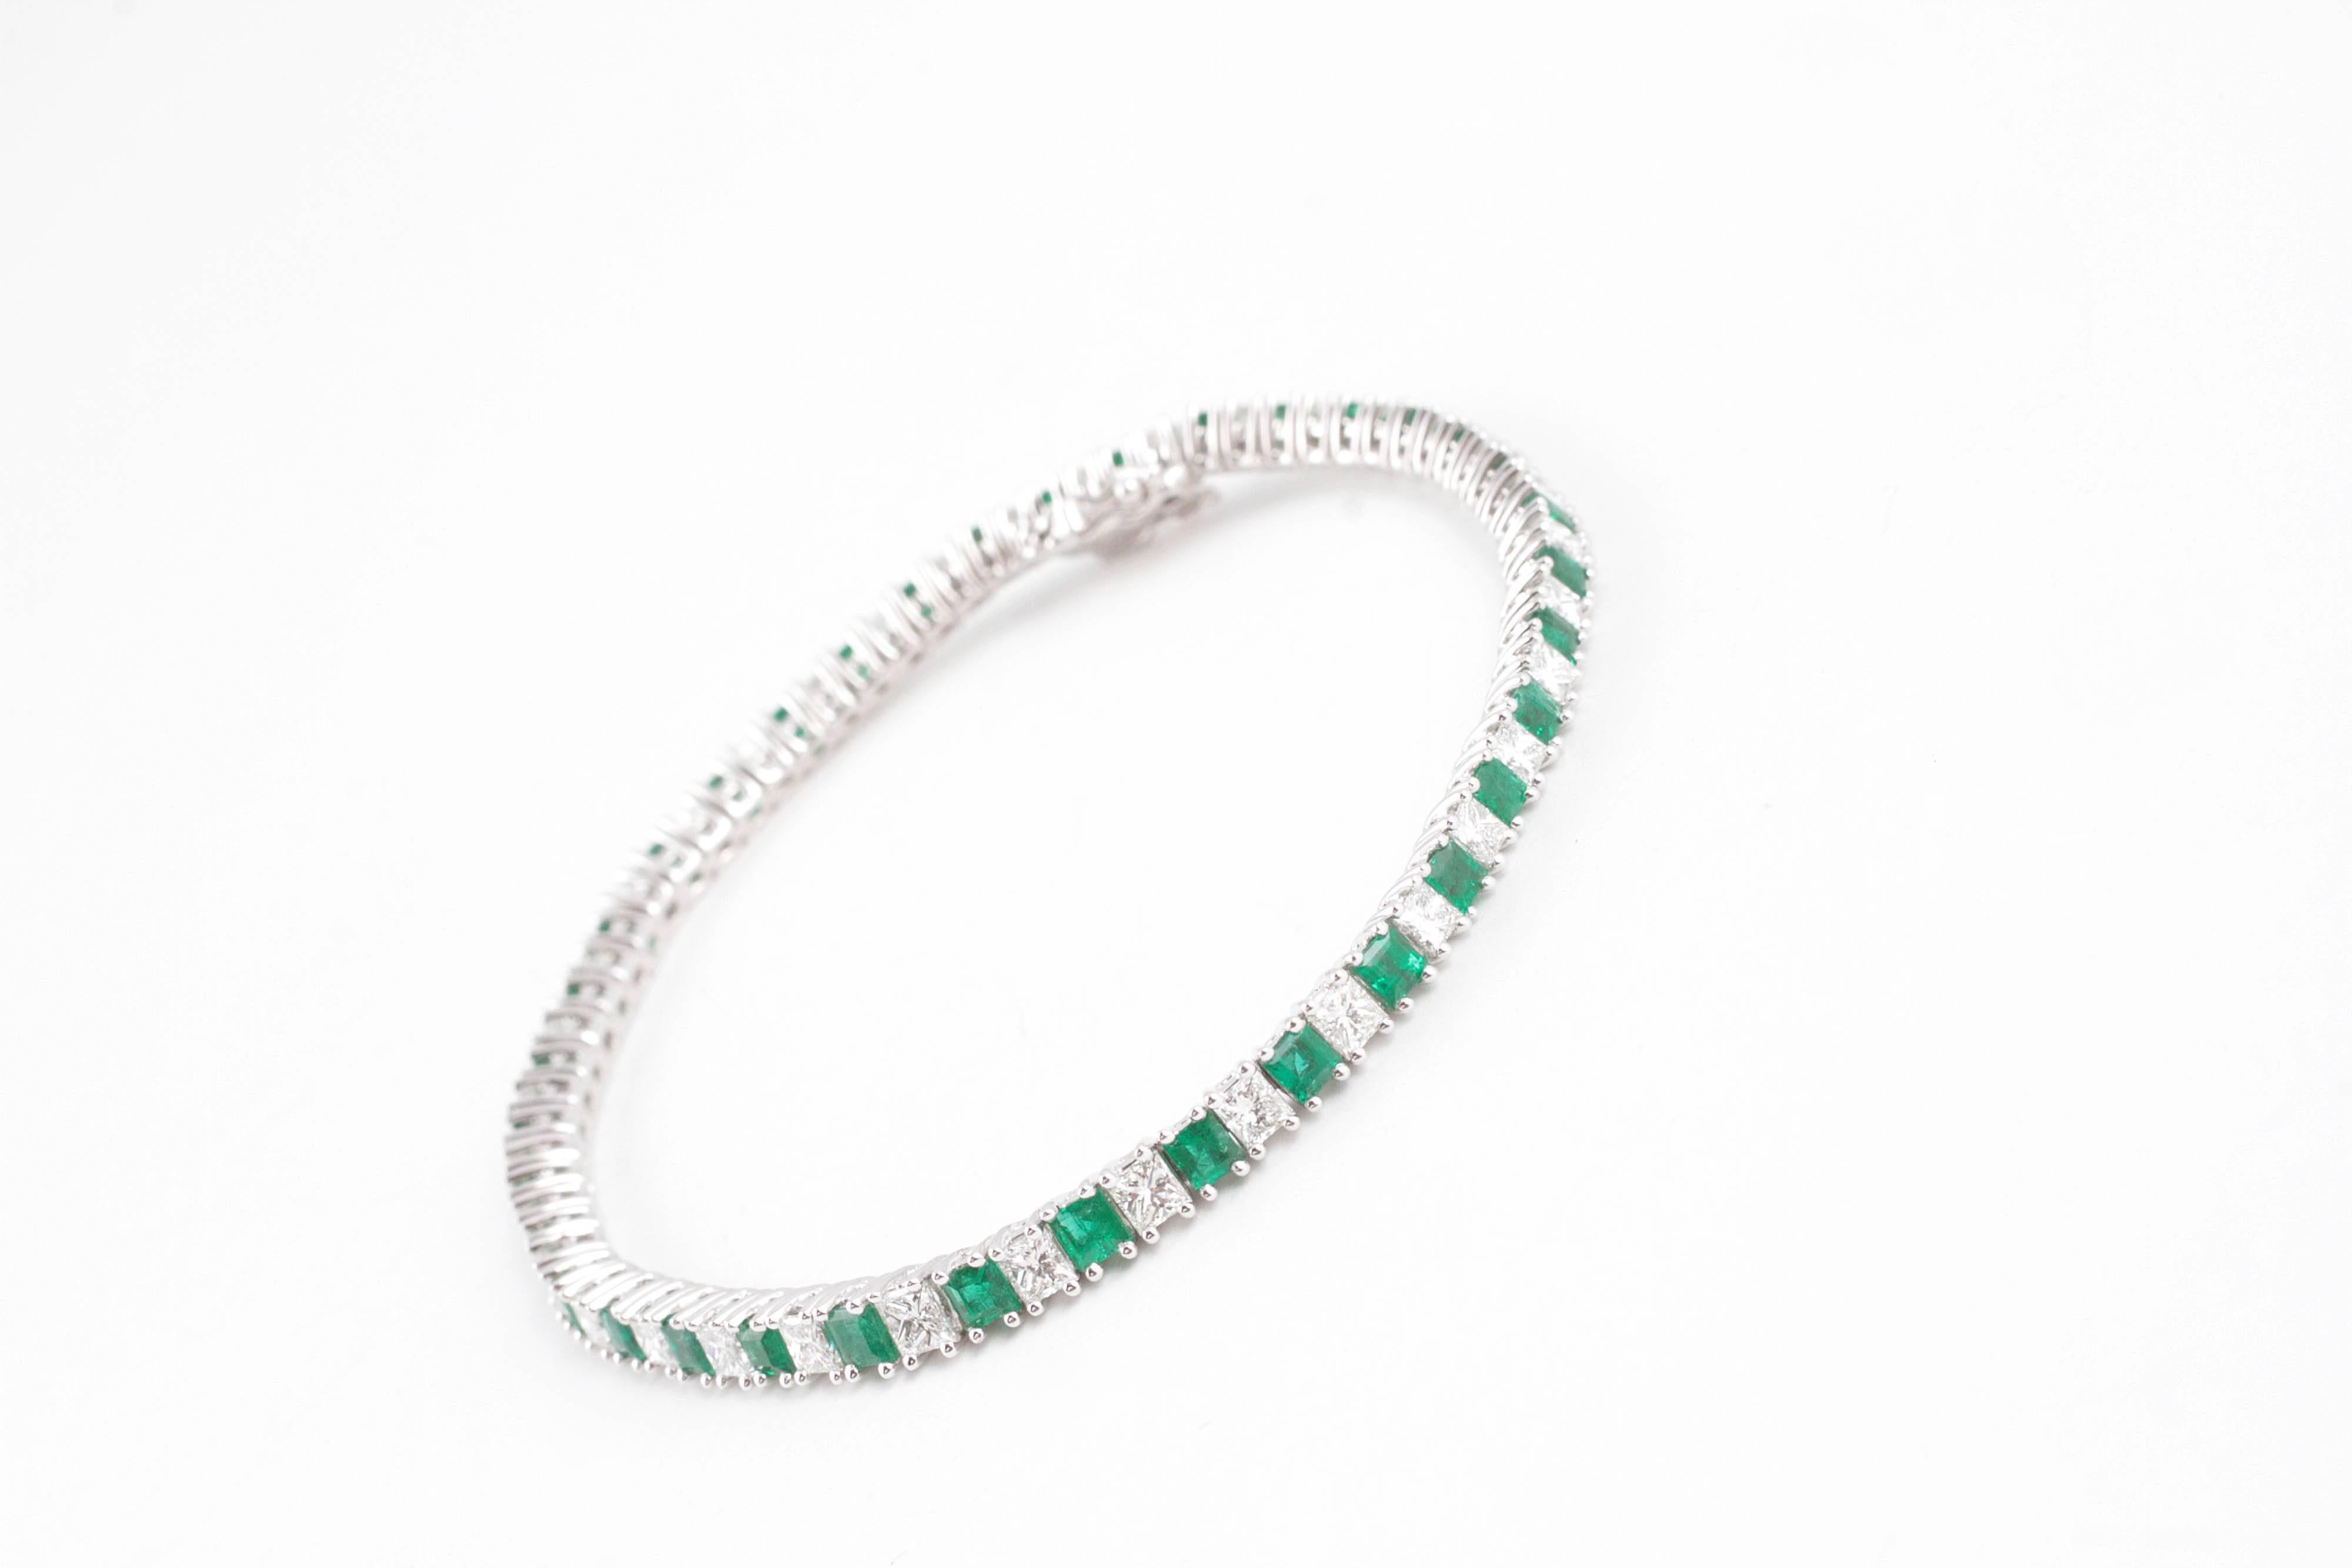 What a show stopper in platinum!  This fabulous bracelet would compliment any arm!  With 2.55 carats of bright green emeralds and 3.75 carats of sparkling diamonds - wouldn't you like to find this in a little box under the tree? 